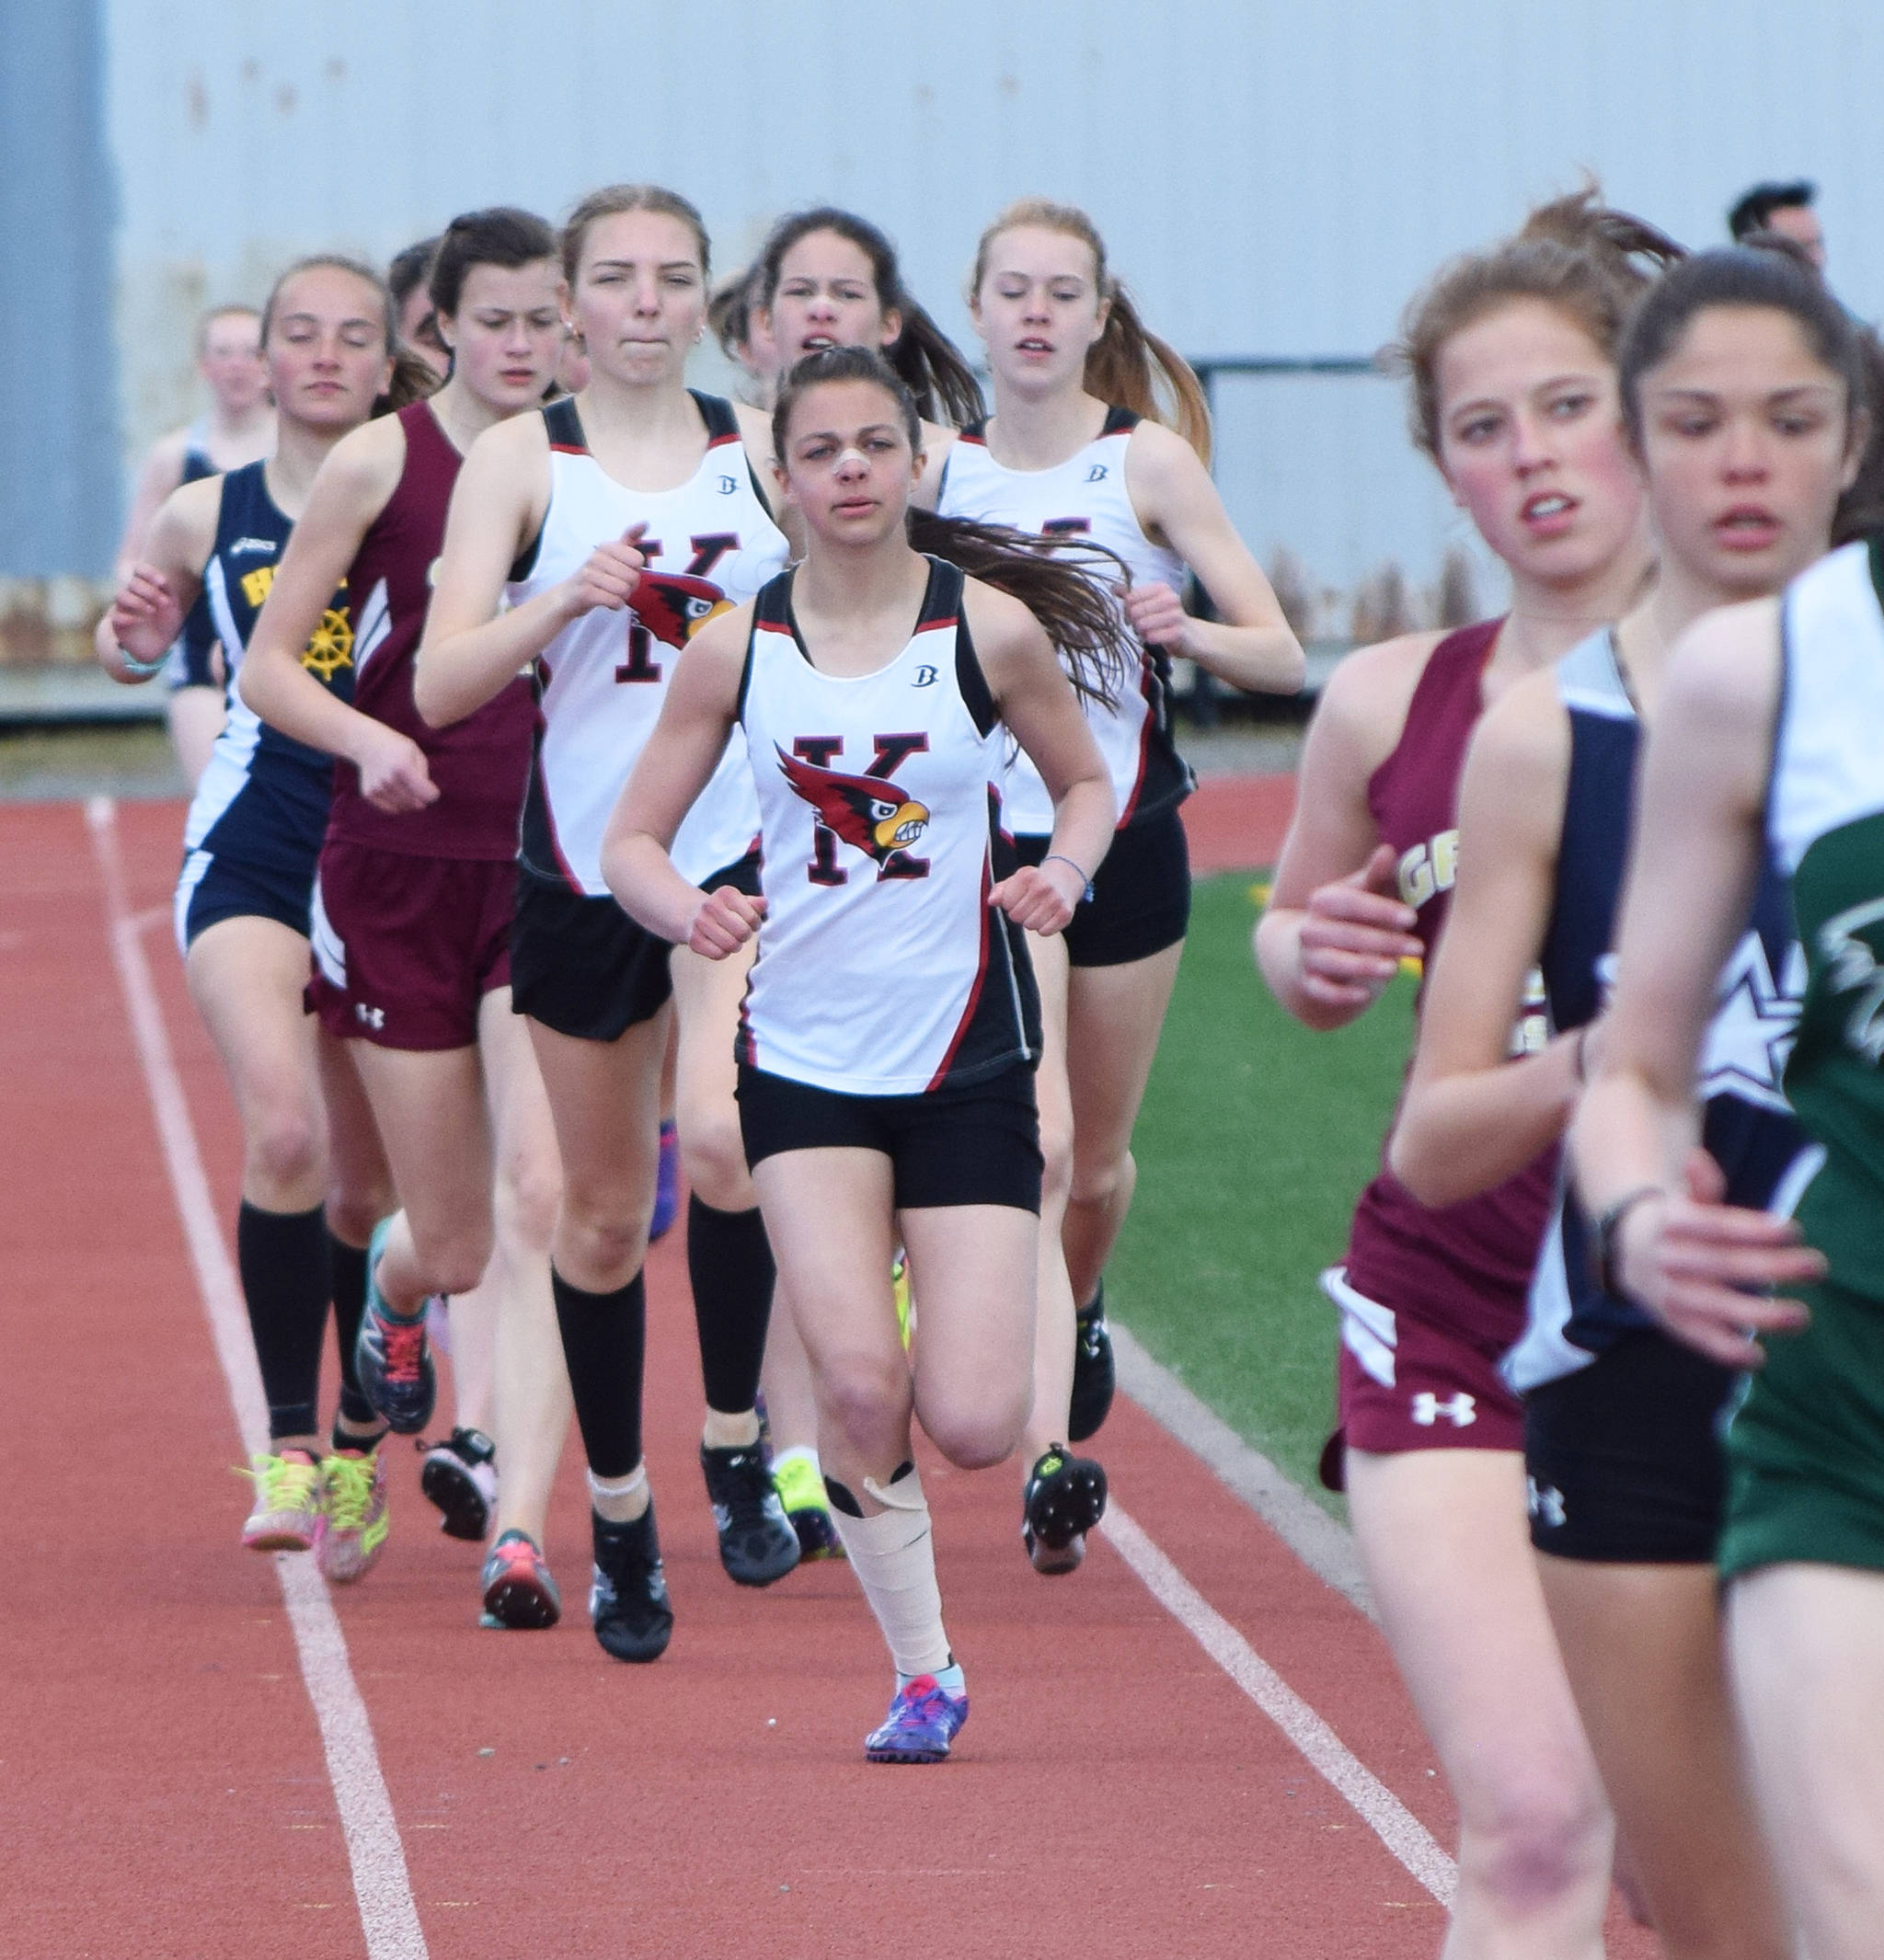 Kenai Central’s Summer Foster leads a trailing group of runners in the girls 1,600 meters Saturday, May 4, 2019, at the Kenai Invitational track meet at Kenai Central High School. (Photo by Joey Klecka/Peninsula Clarion)